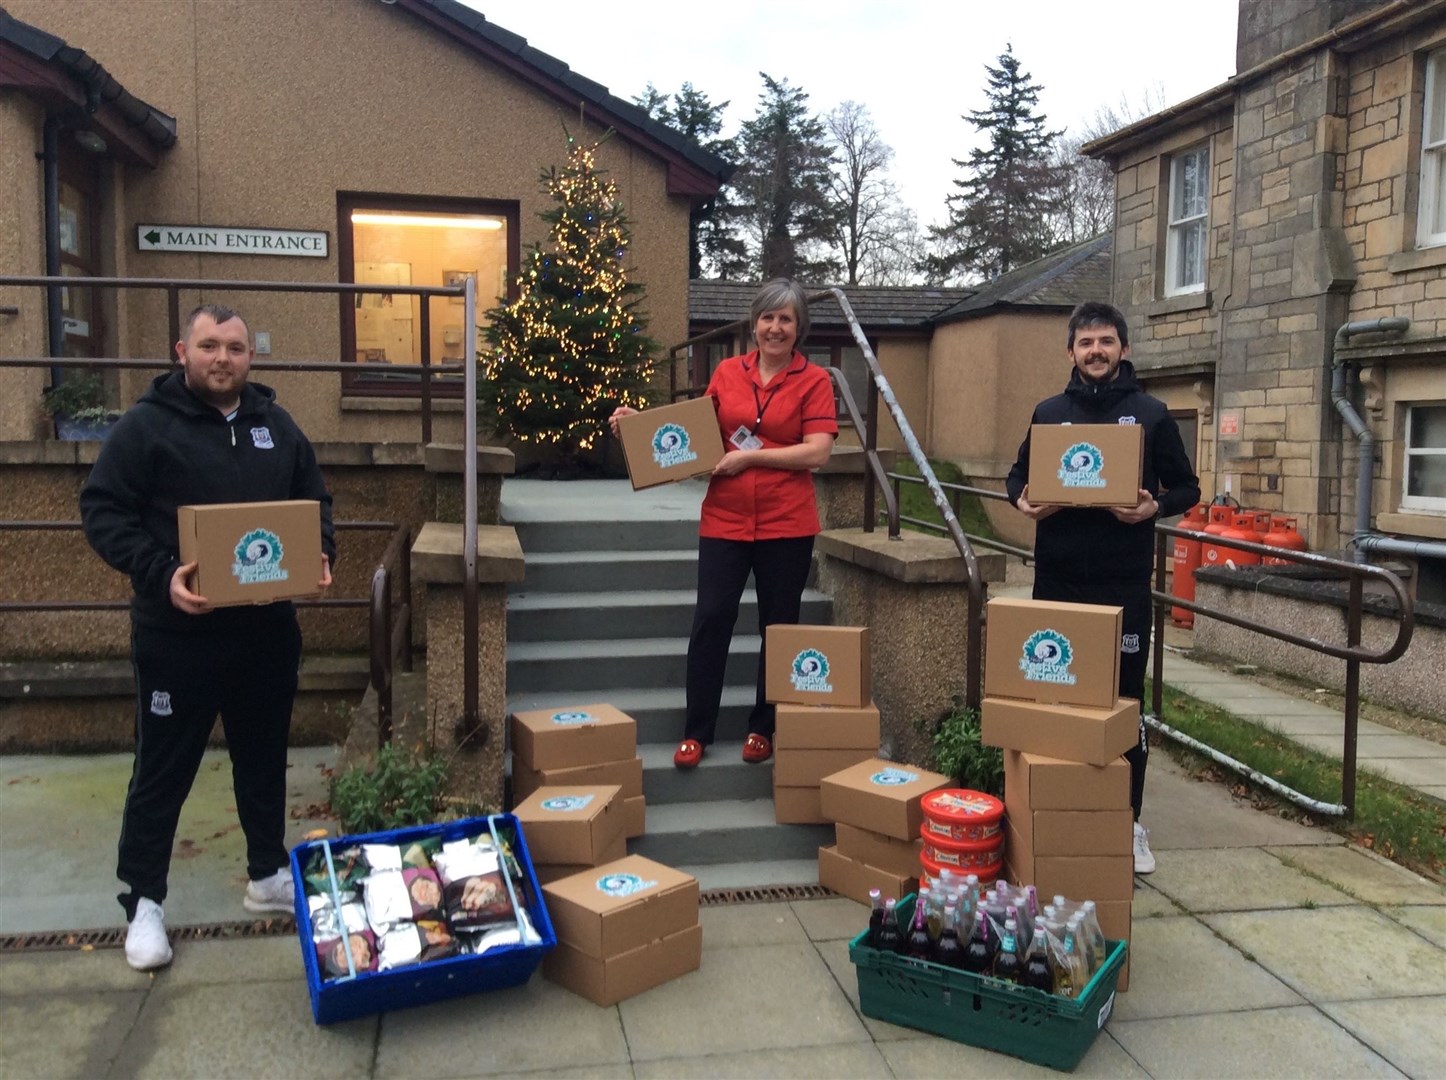 Elgin City drop hampers at The Grove. Left to right: Craigh Stewart, Alison Gauld Robertson & Keiran Carty.